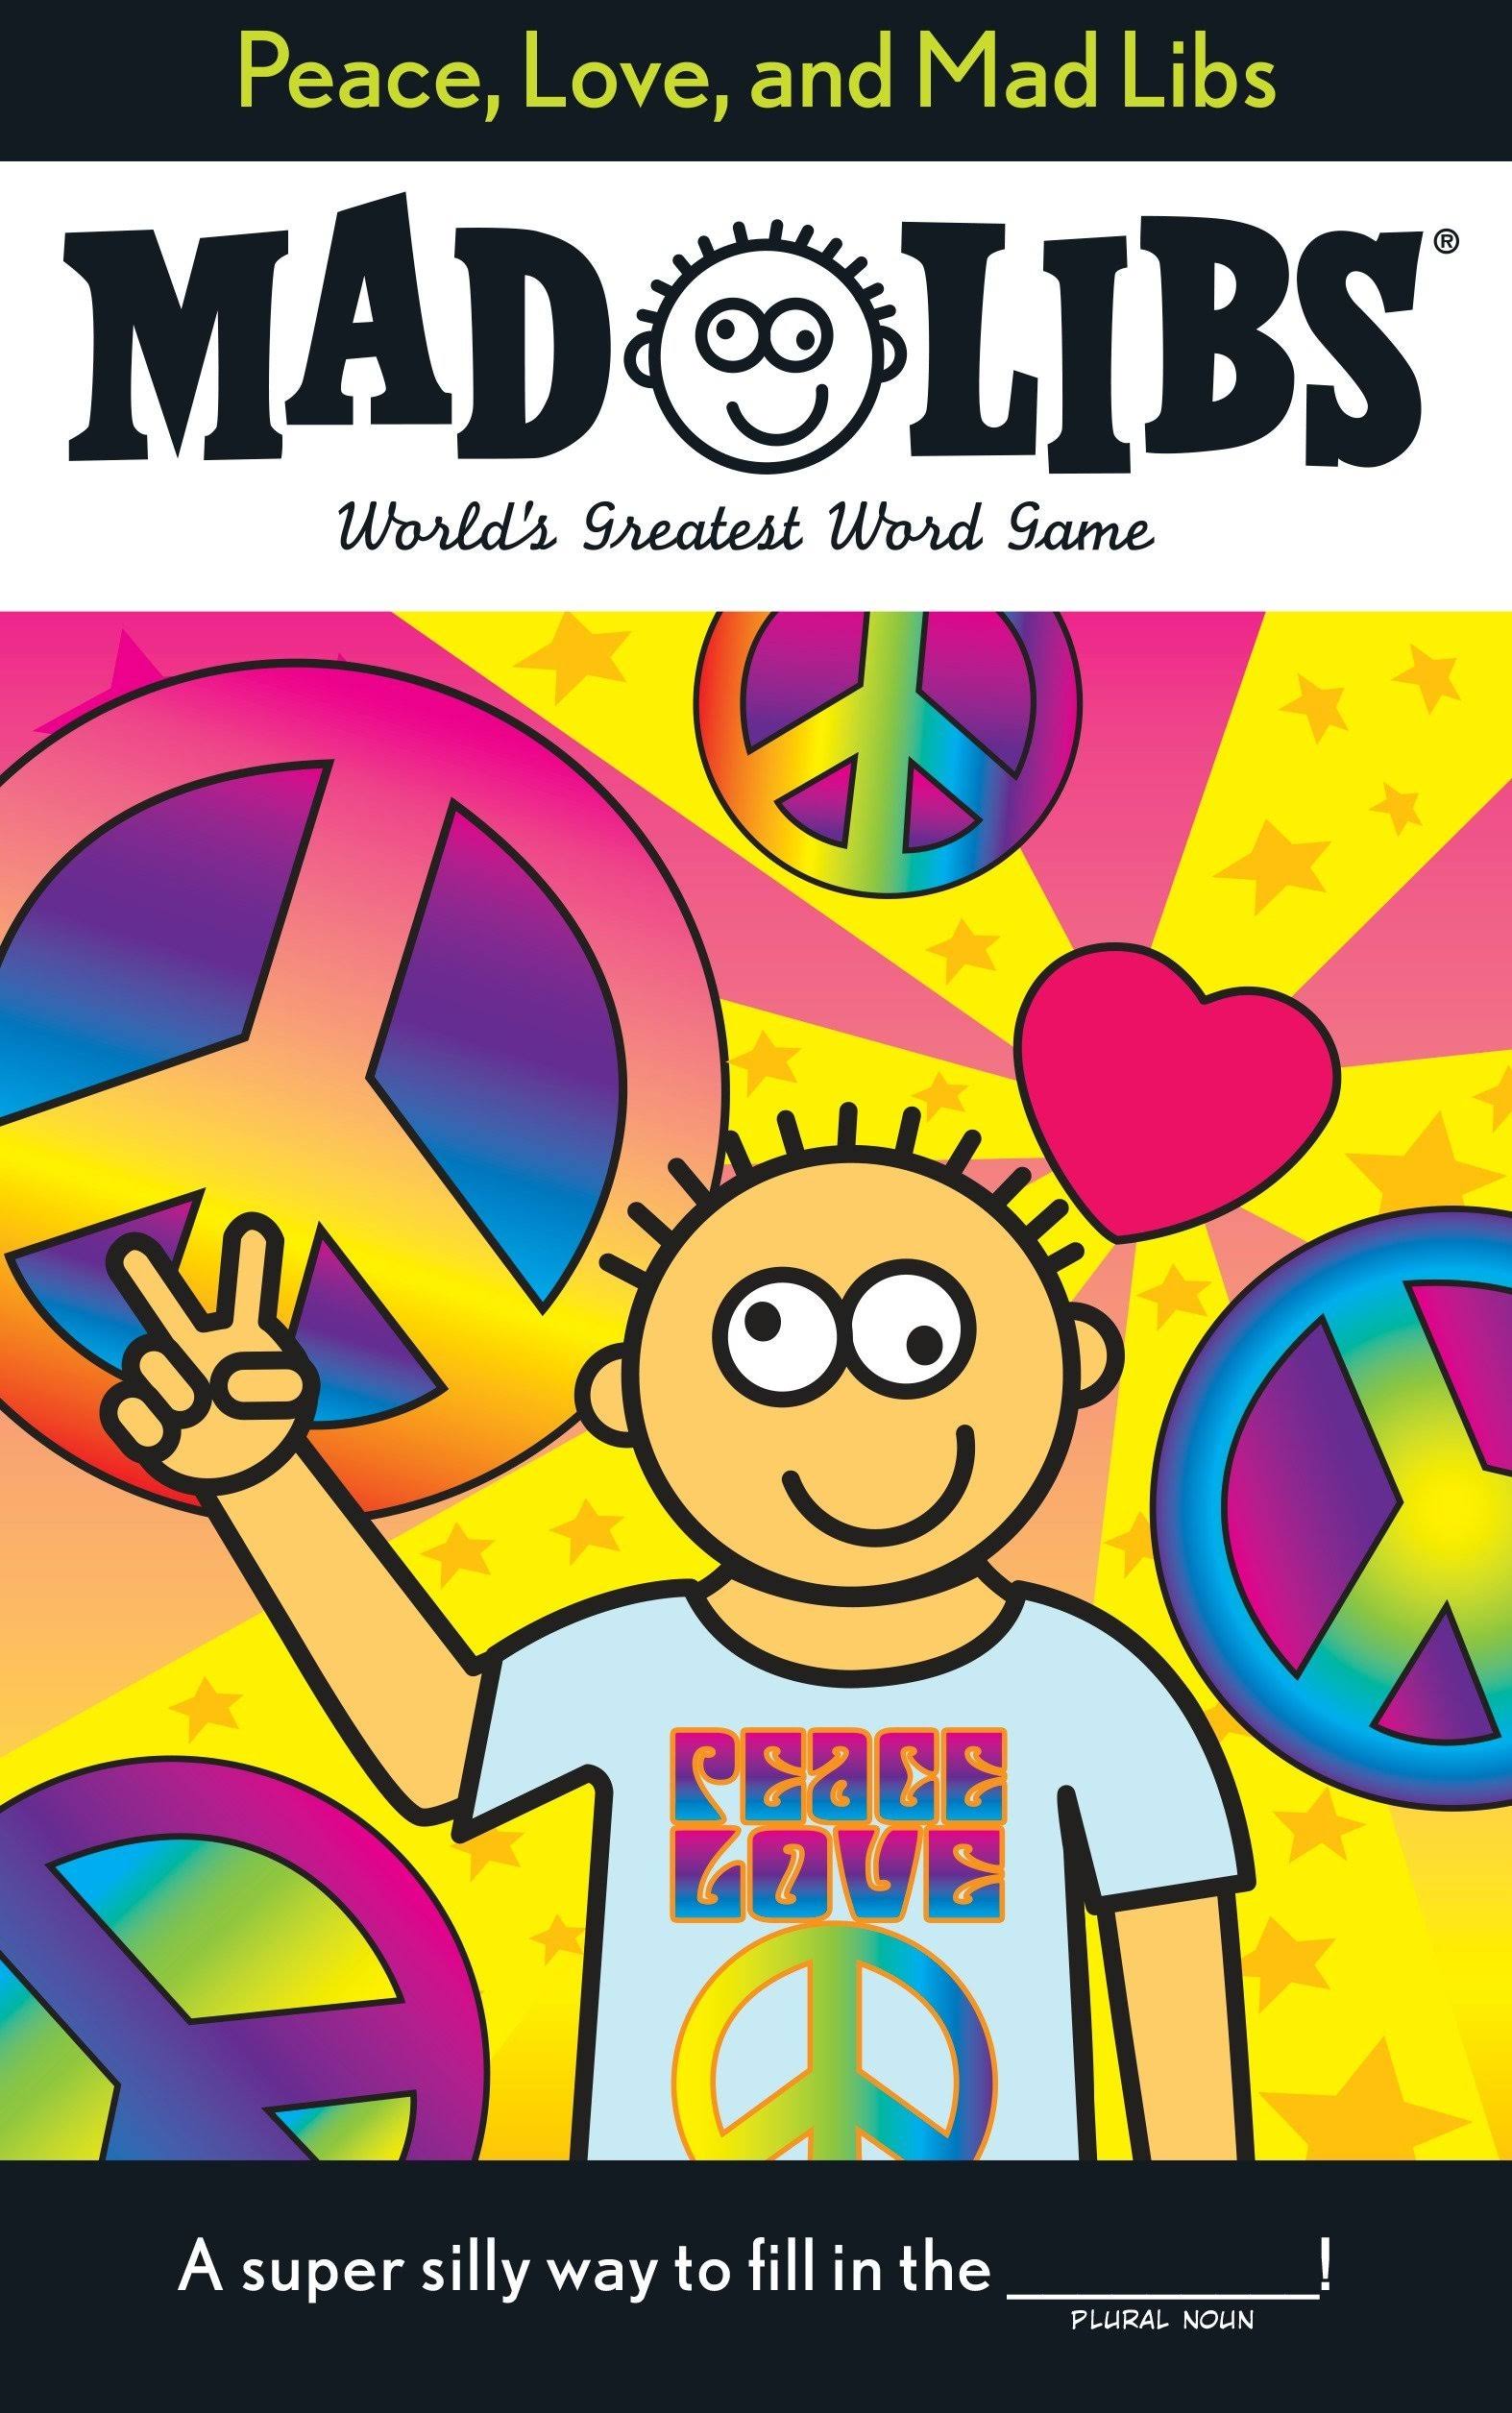 Peace, Love, and Mad Libs - Roger Price and Leonard Stern